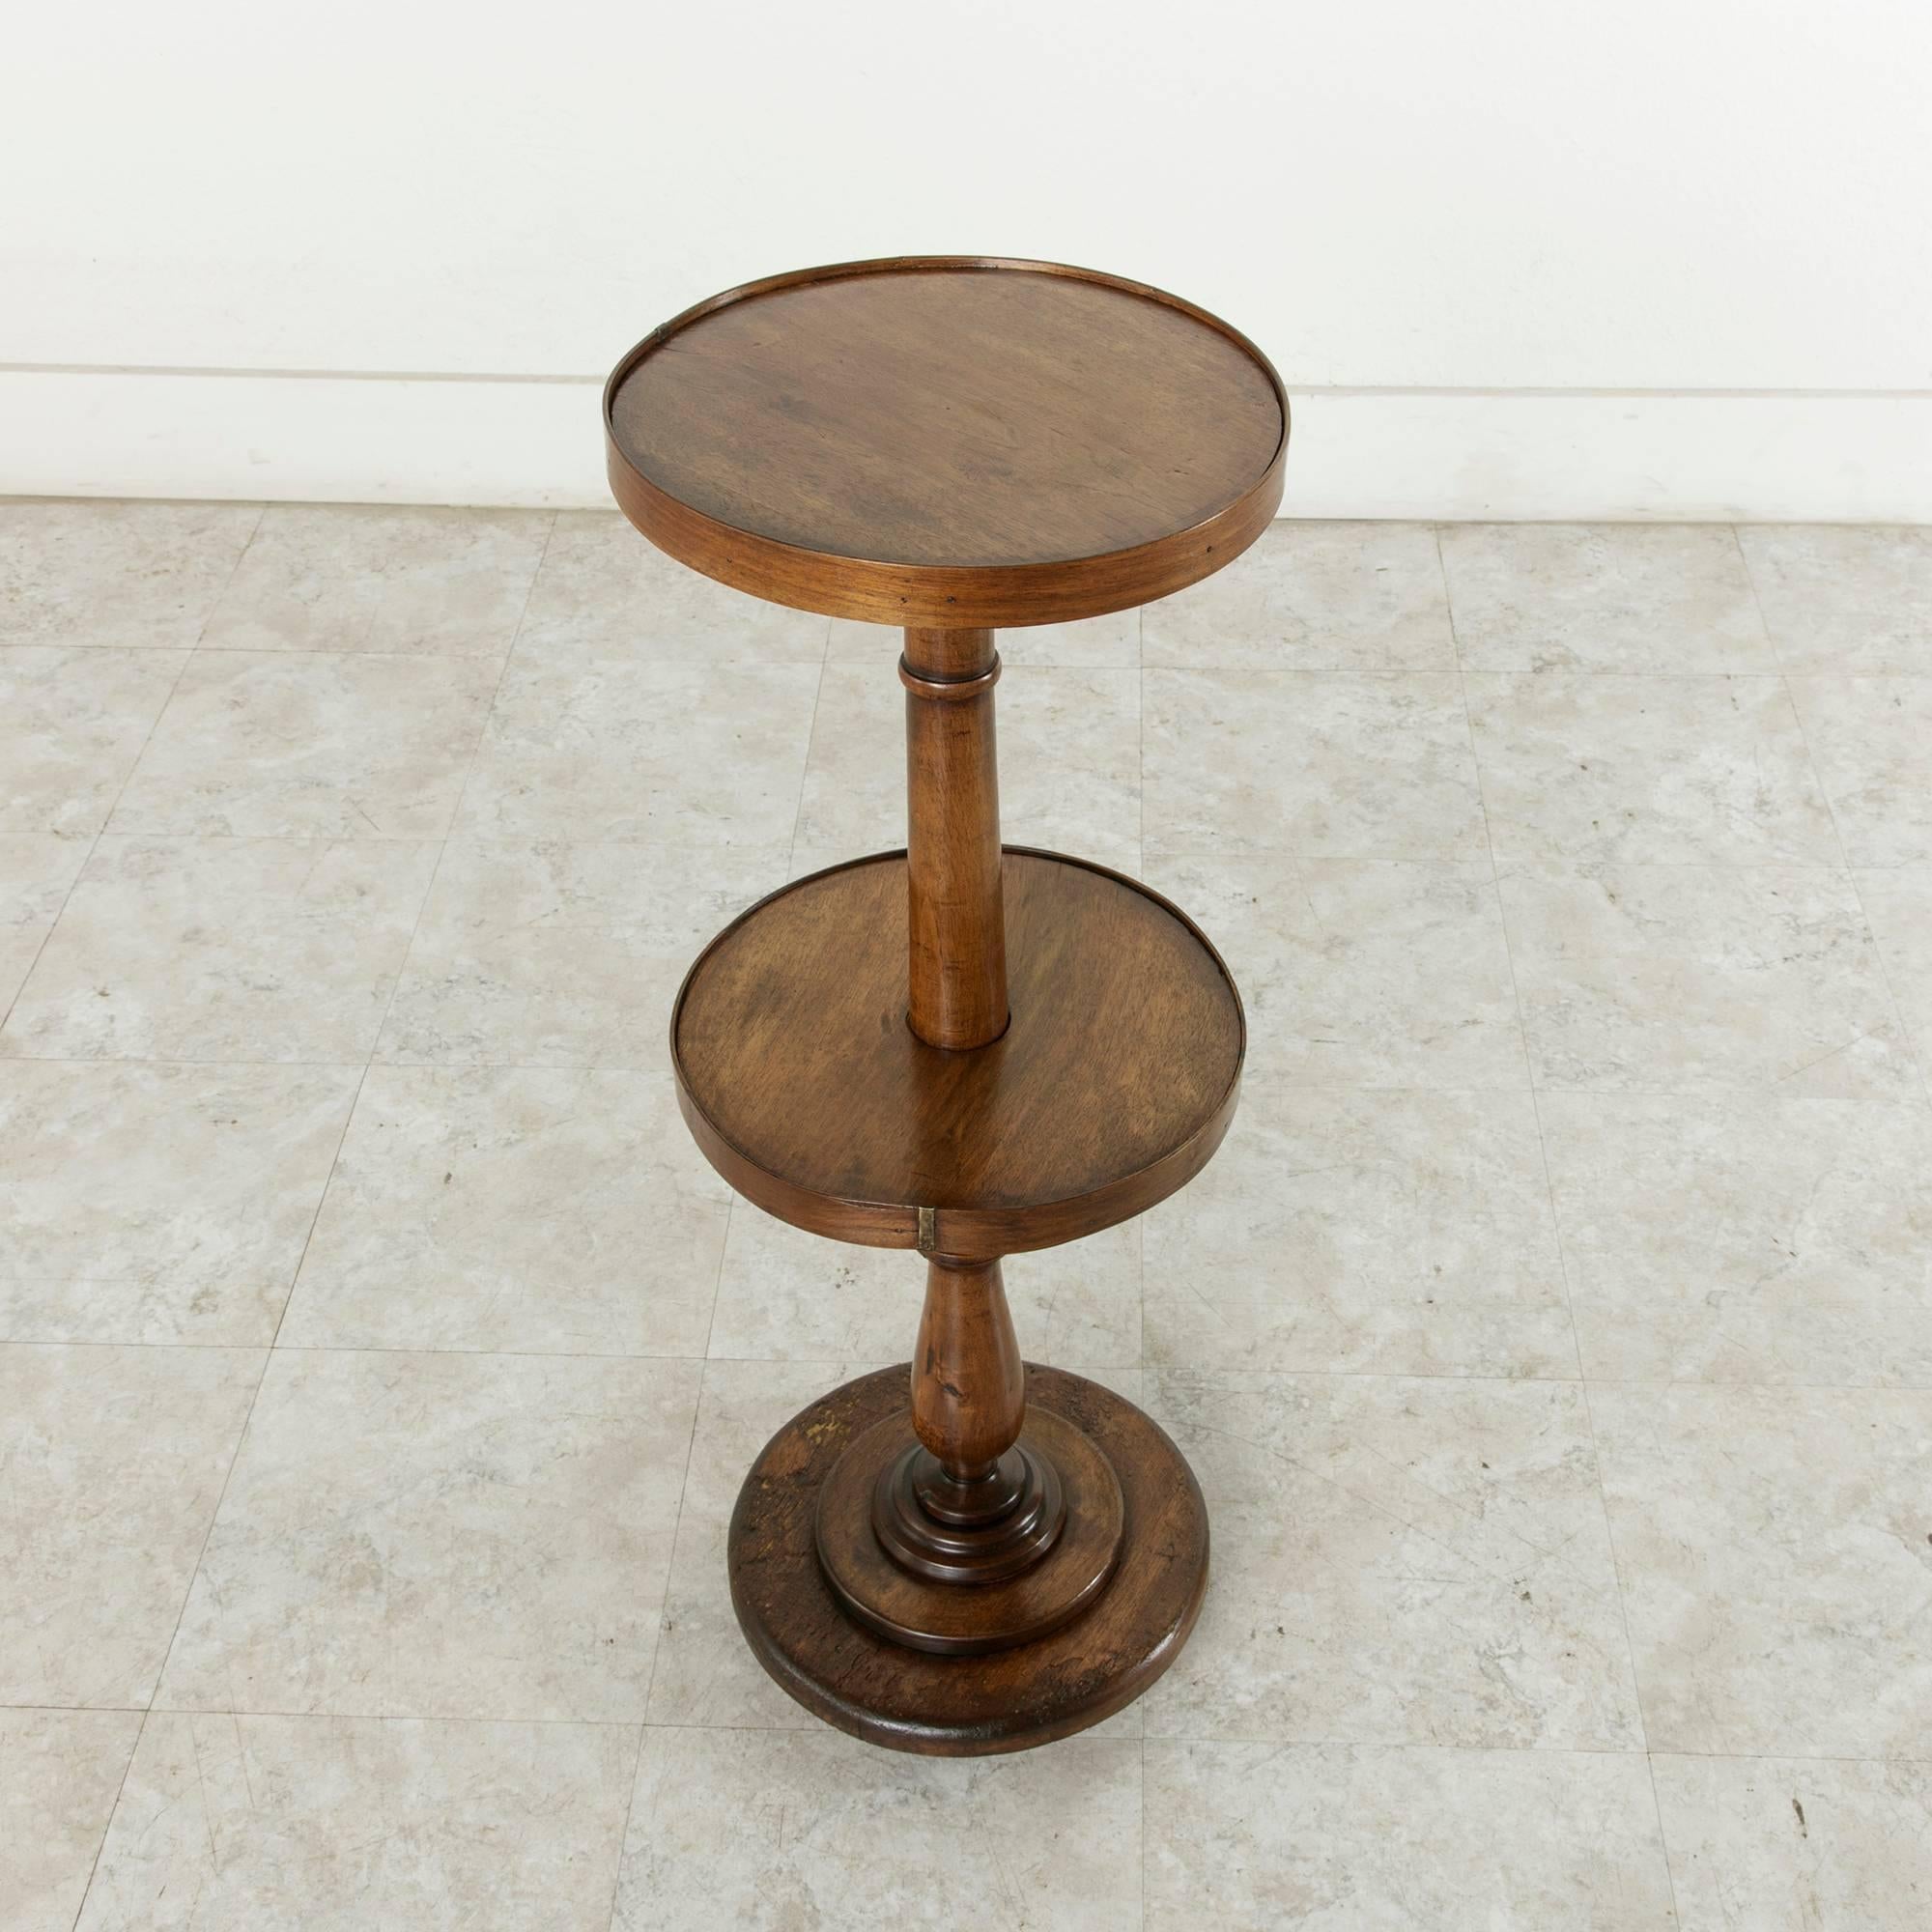 Late 19th Century French Walnut Lace Maker's Table, Pedestal, or Sculpture Stand 2